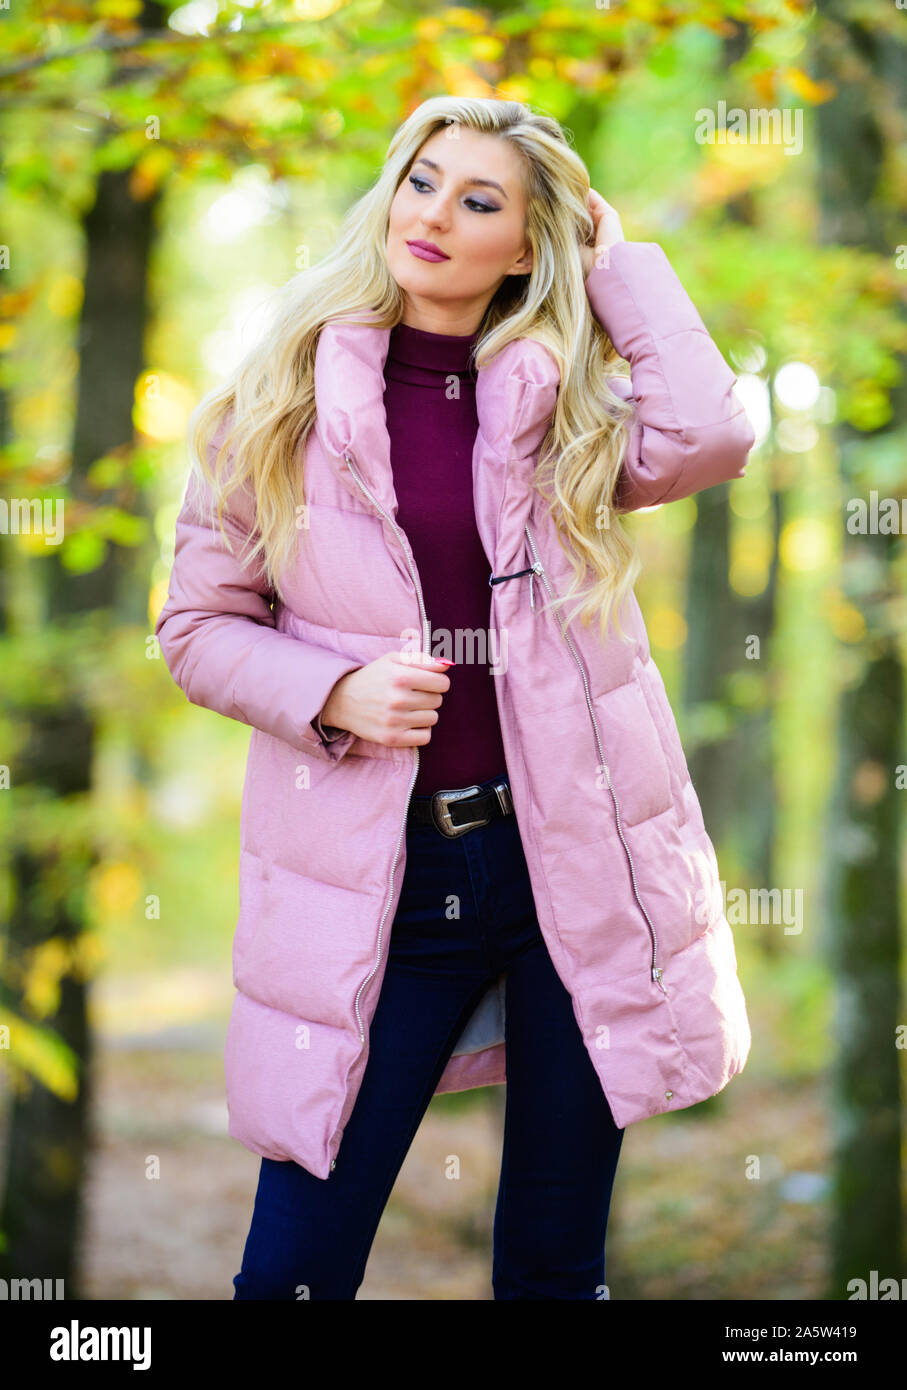 Jackets everyone should have. Girl fashionable blonde walk in park ...